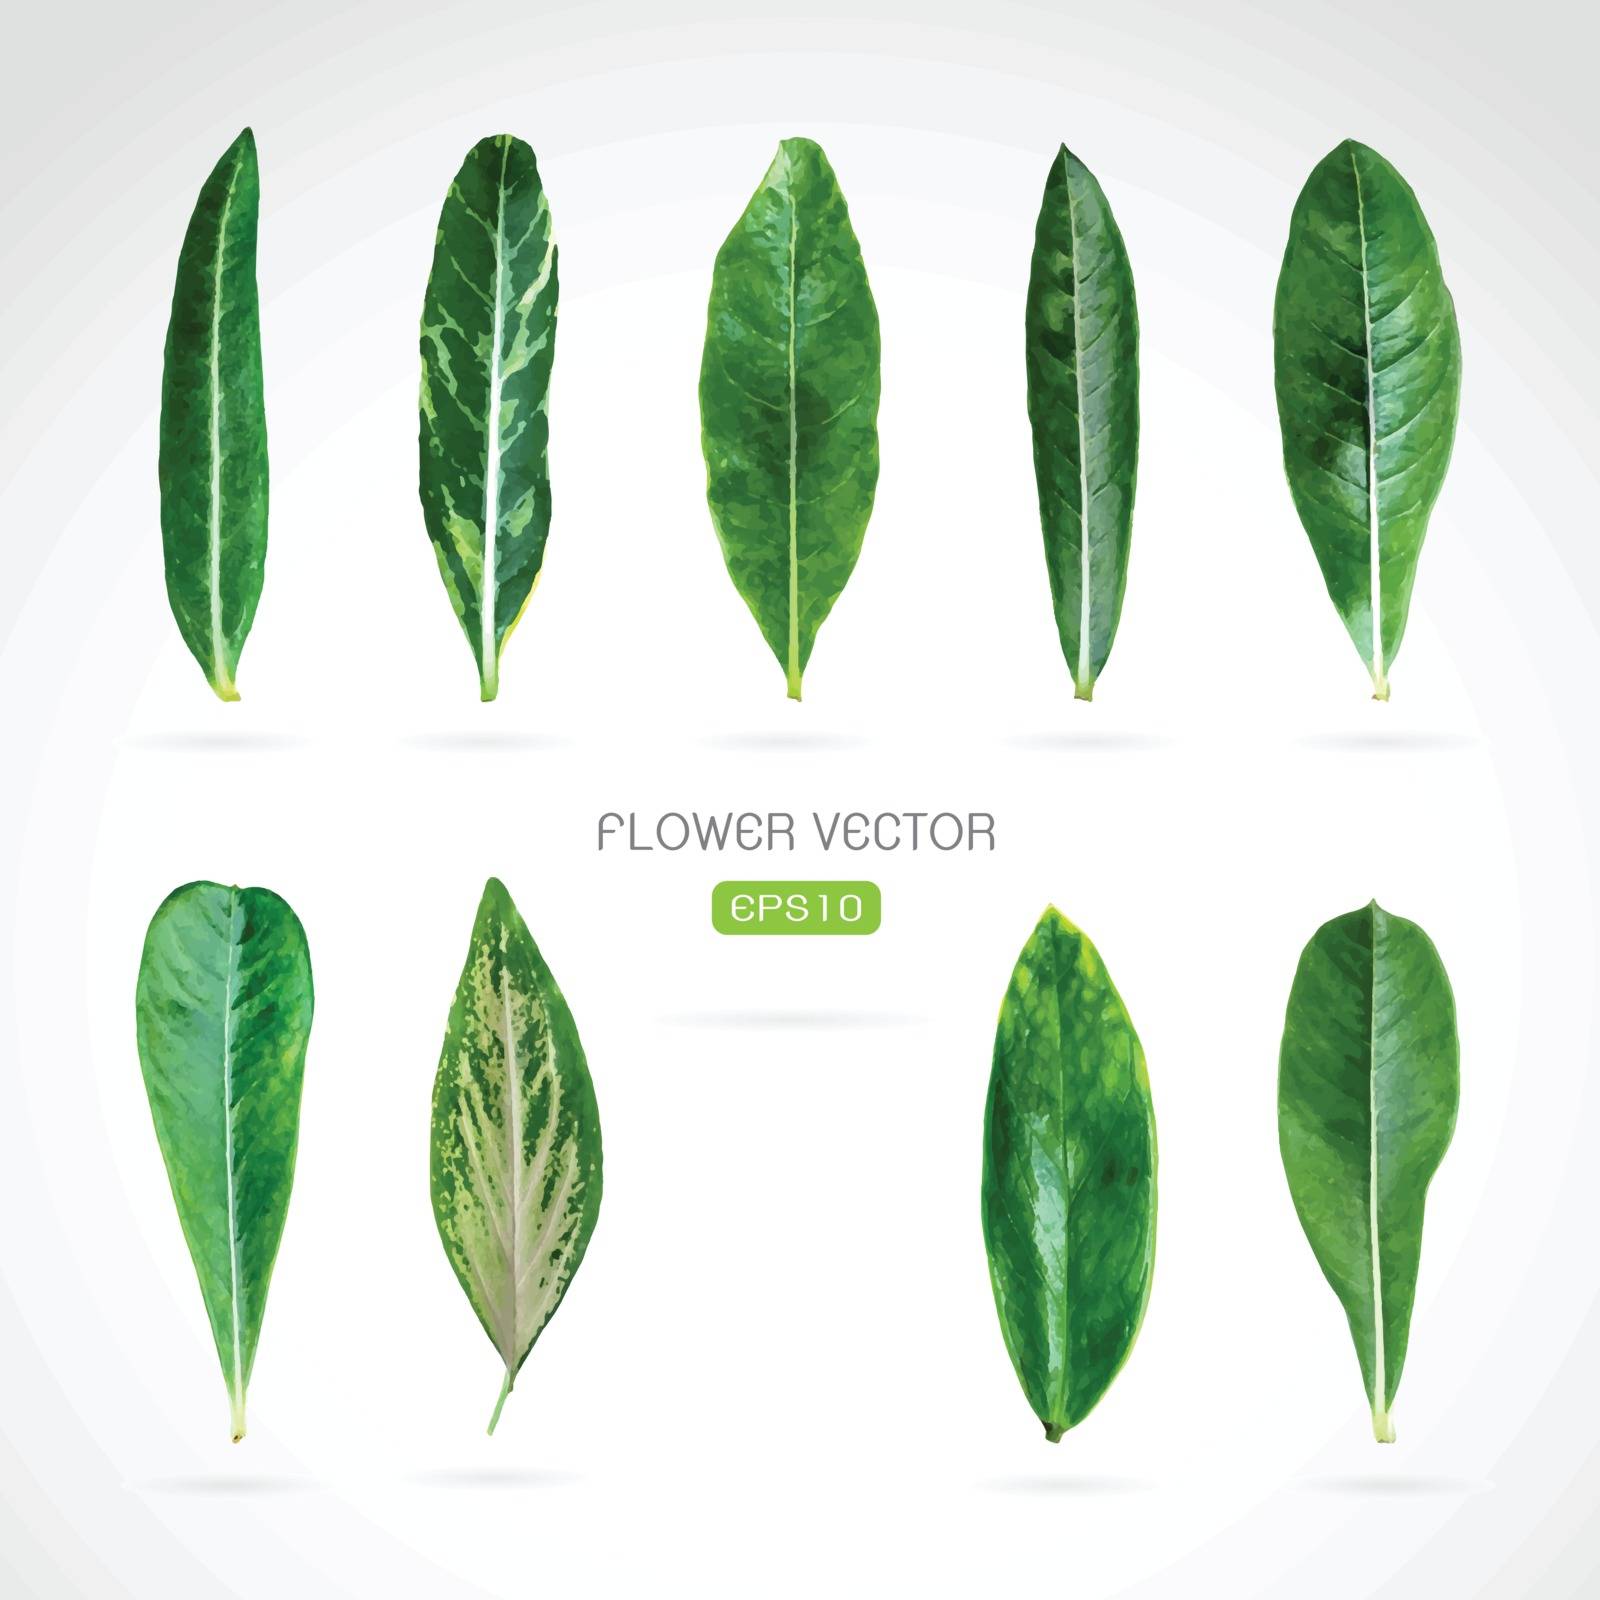 Vector image of leaves on white background by yod67